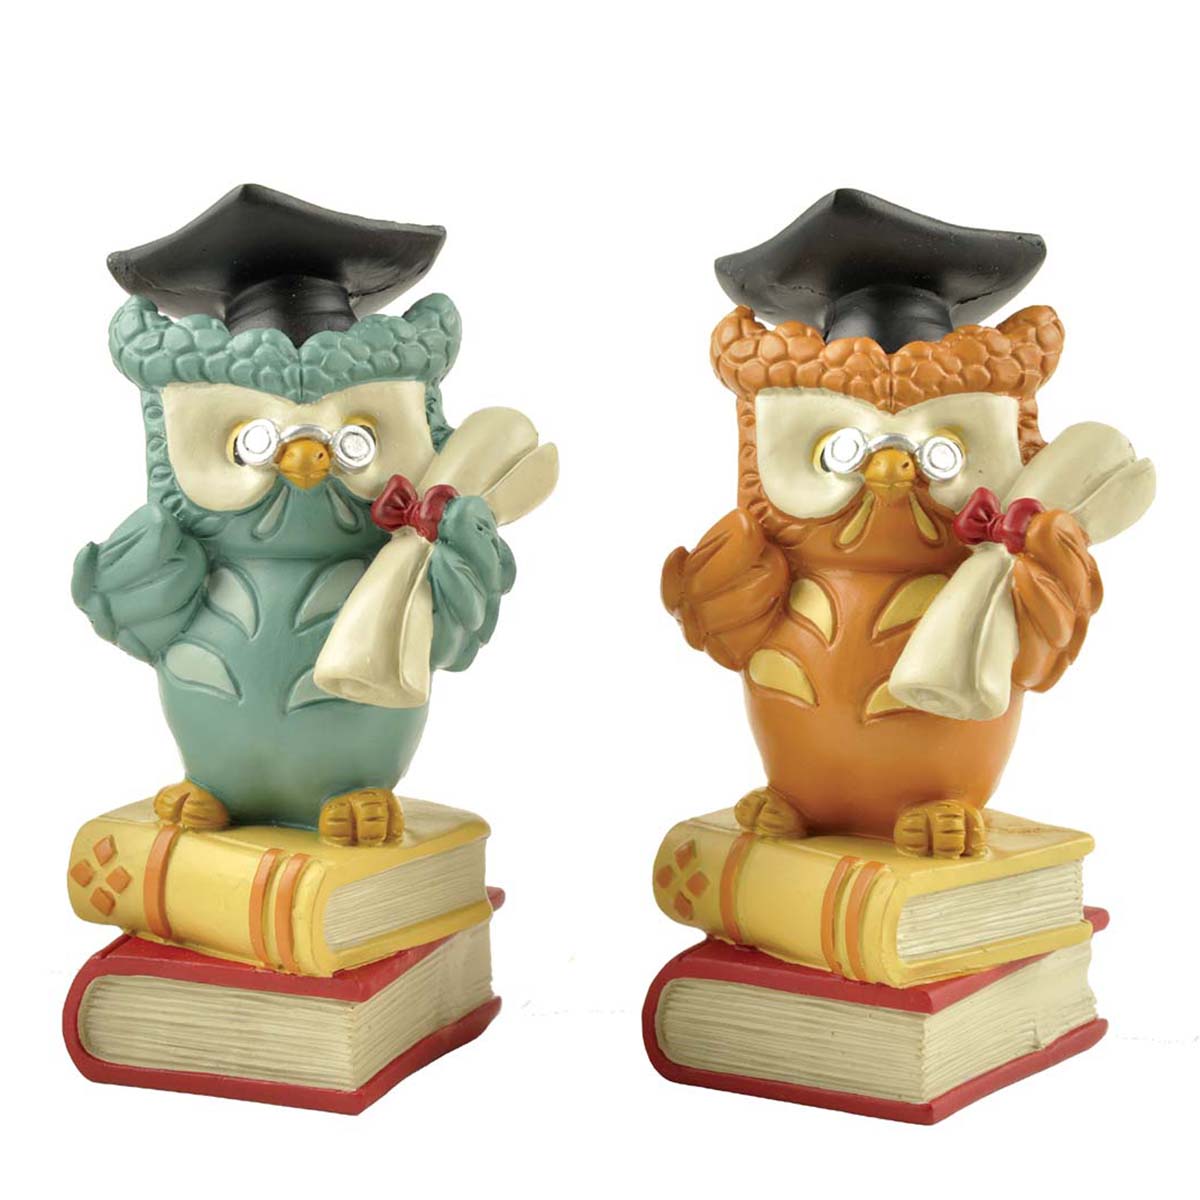 Ennas wholesale graduation gifts for boys promotional at discount-1